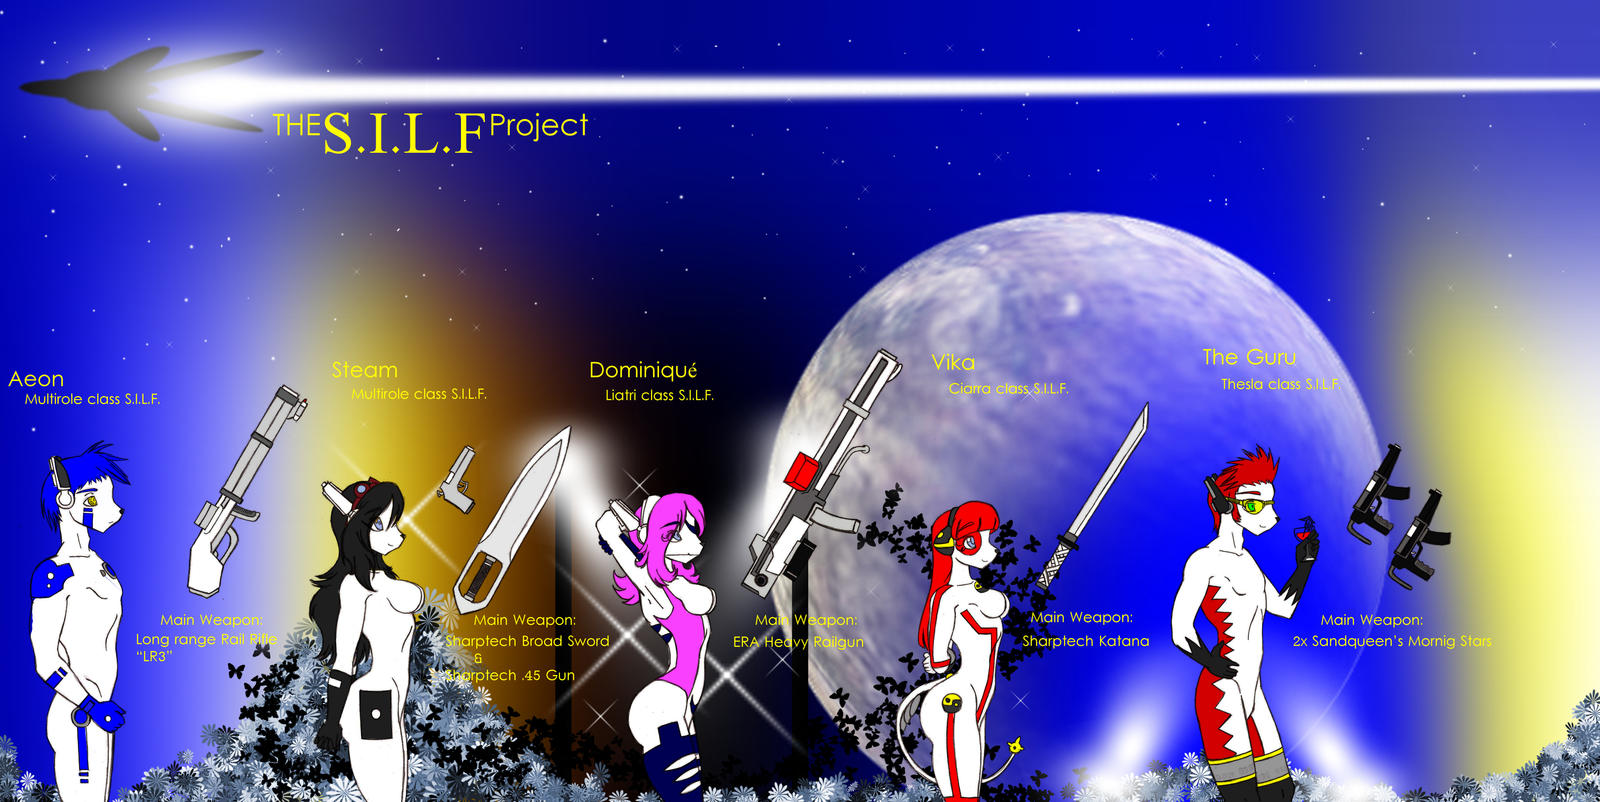 The S.I.L.F. Project